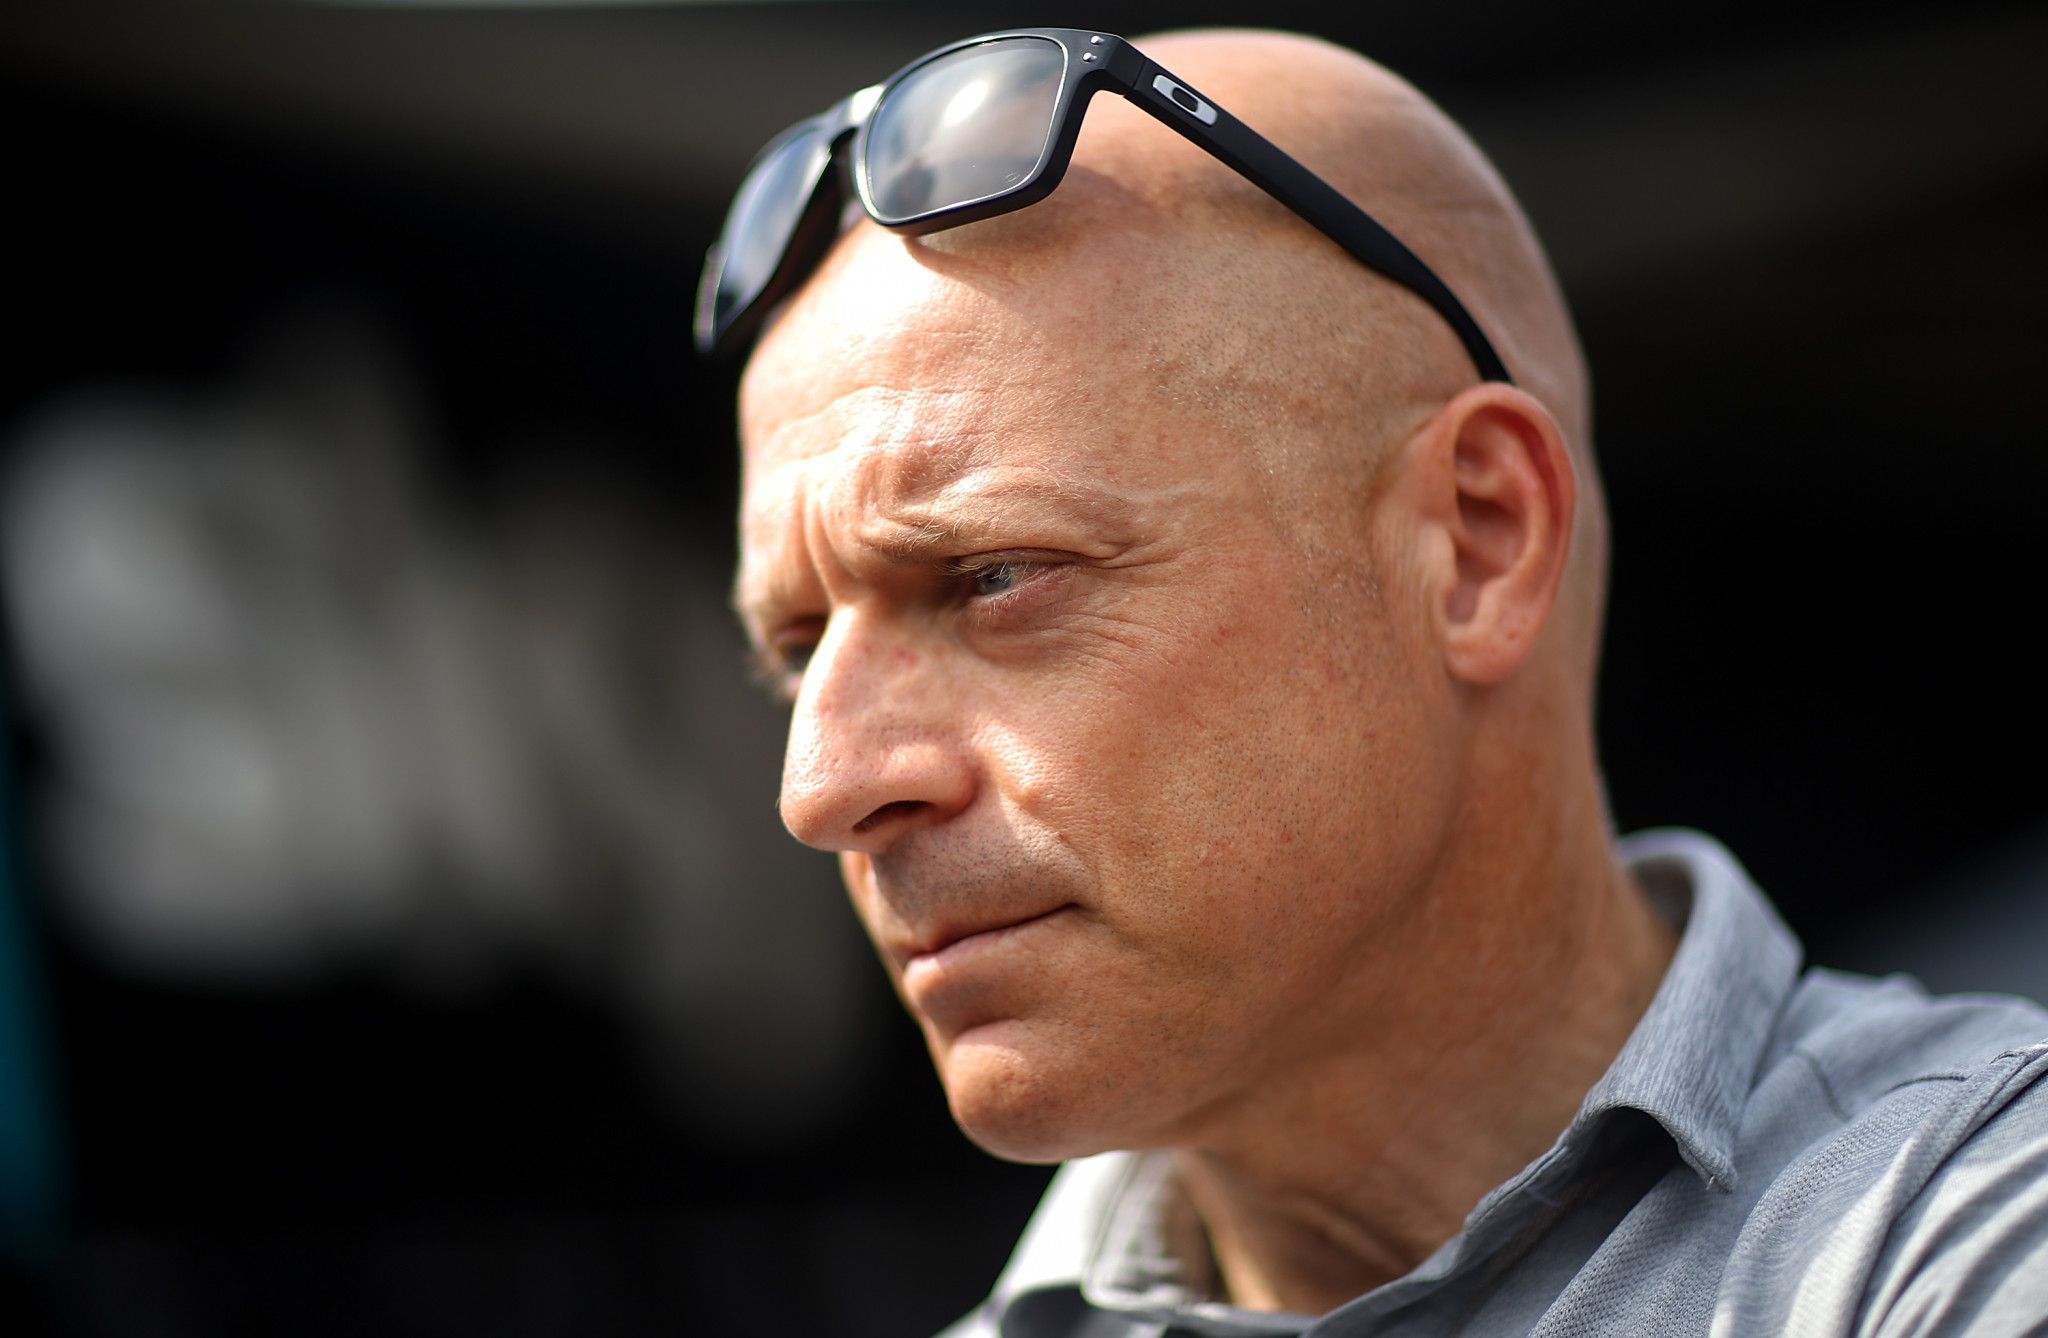 Team Sky, whose principal is Sir David Brailsford, has previously been accused of crossing an 